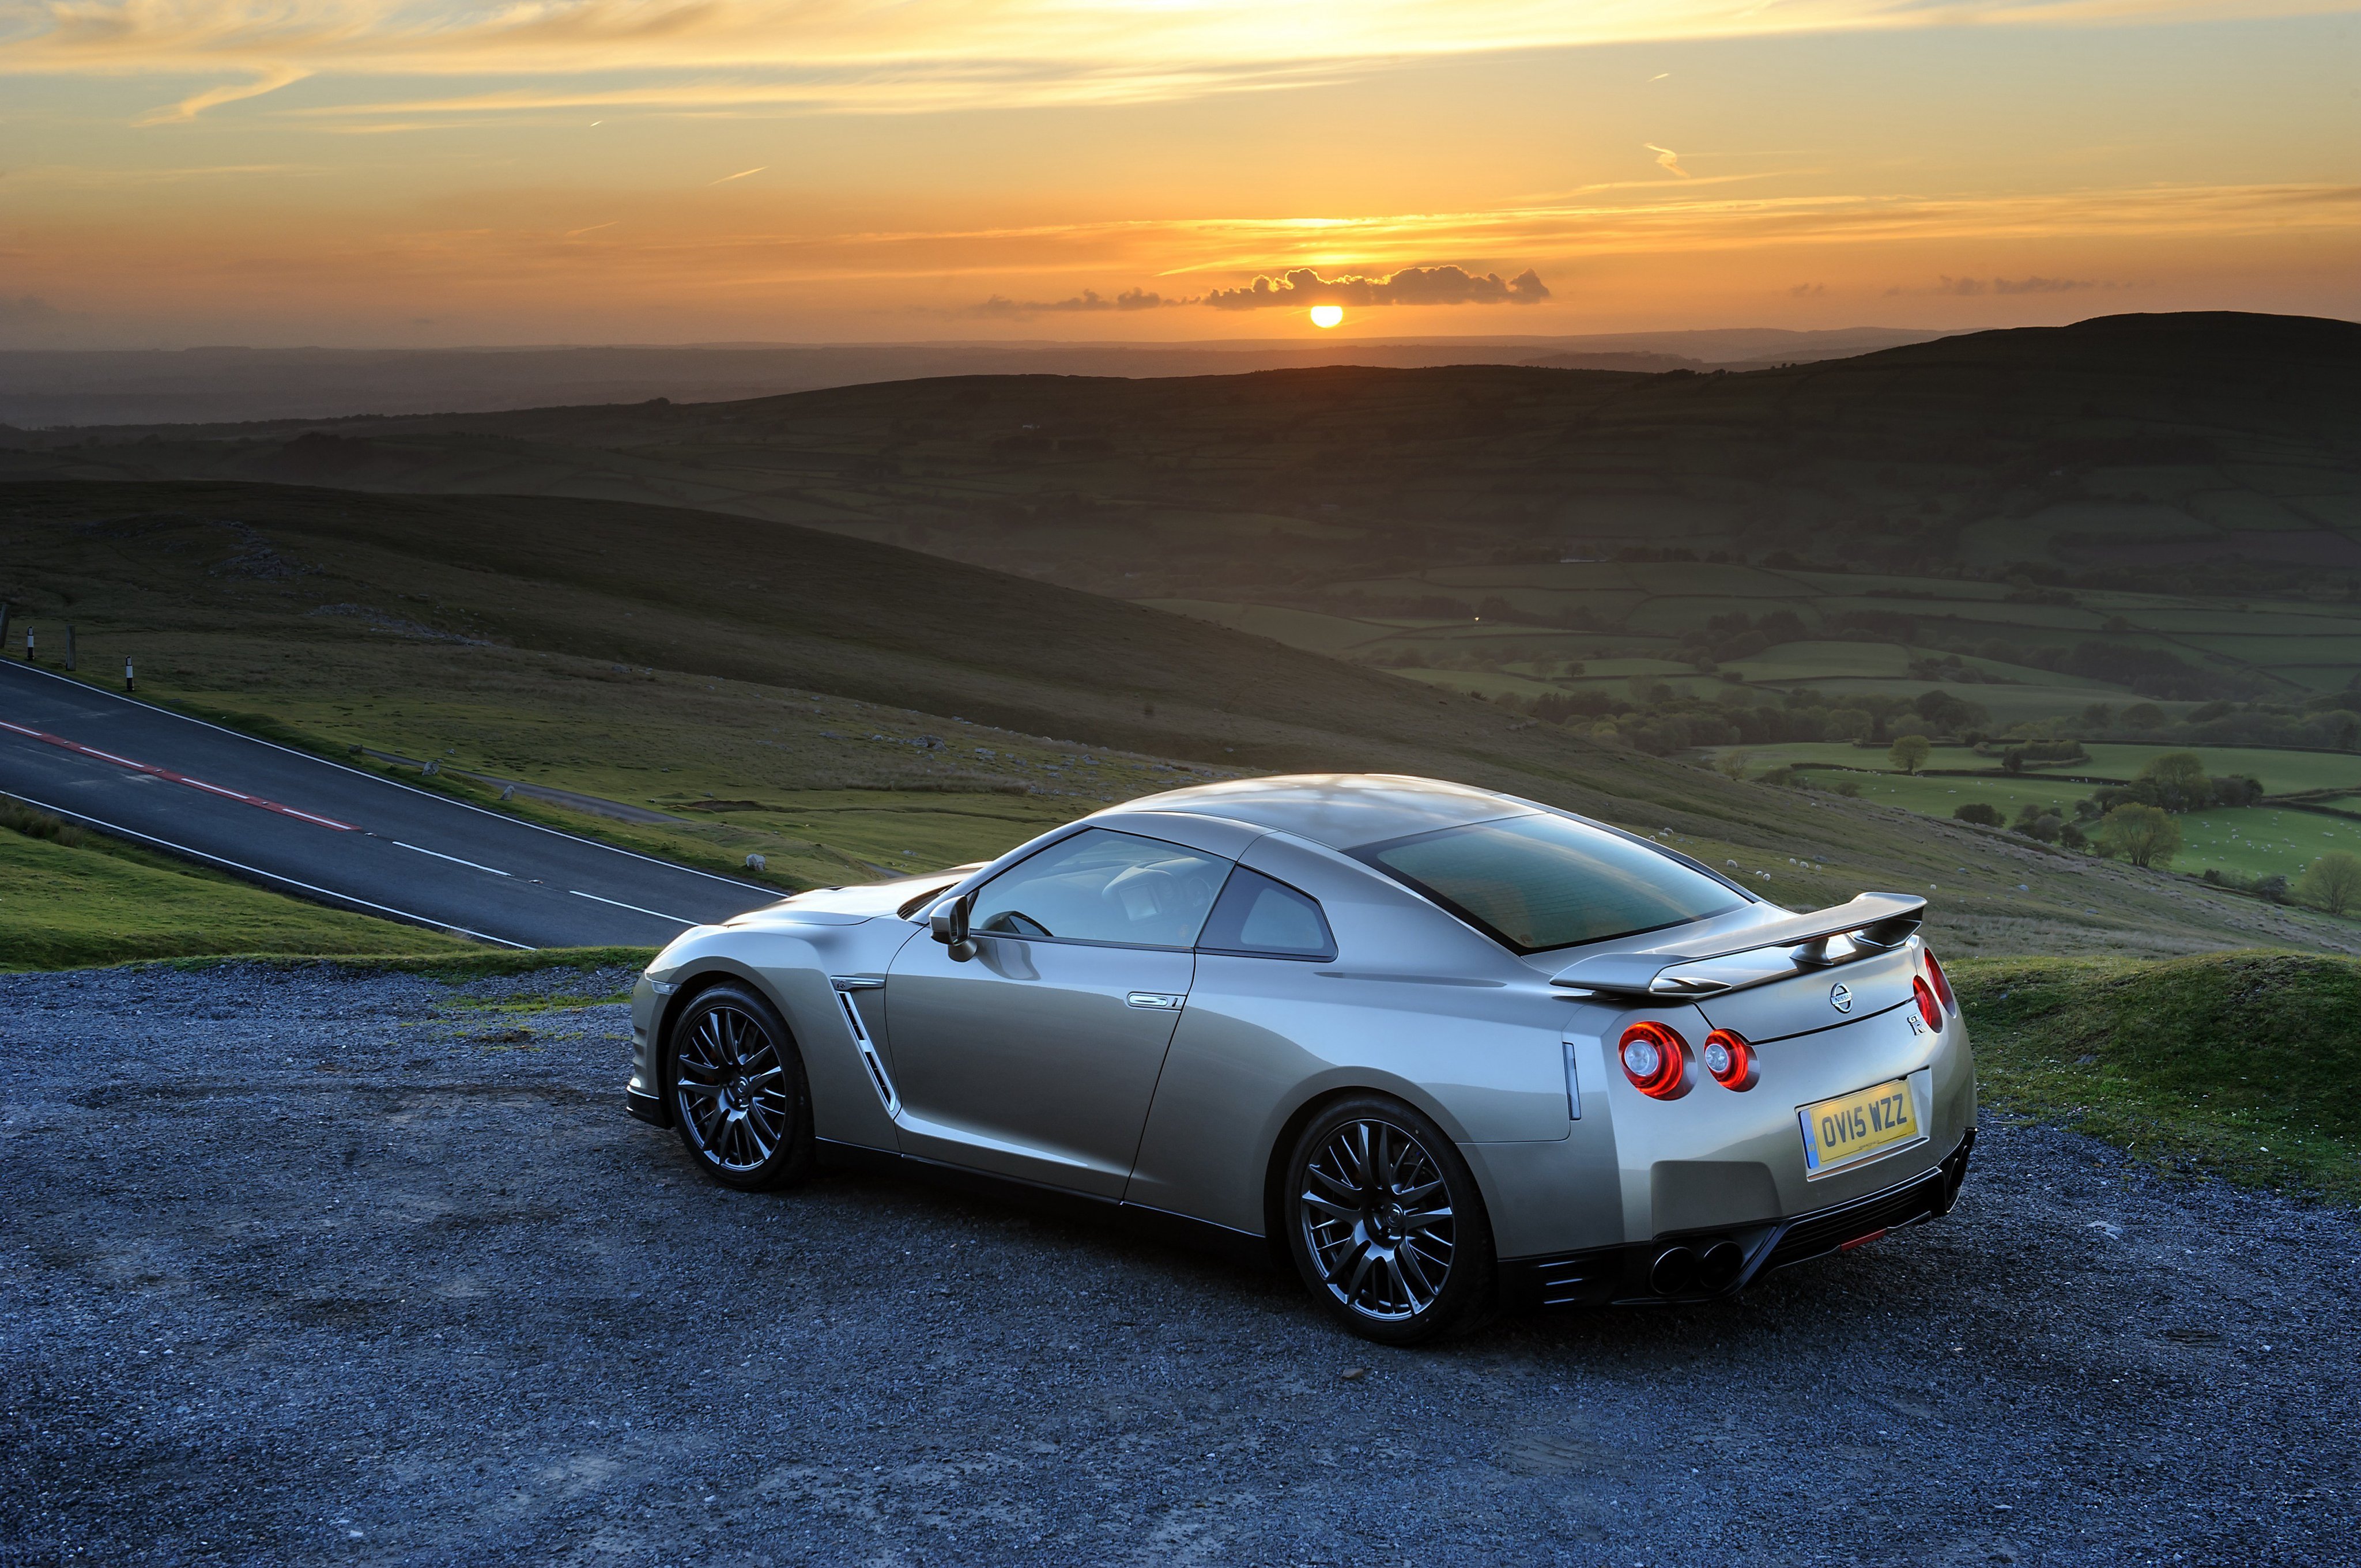 nissan, Gt r, 45th, Anniversary, Uk spec,  r35 , Coupe, Cars, 2014 Wallpaper